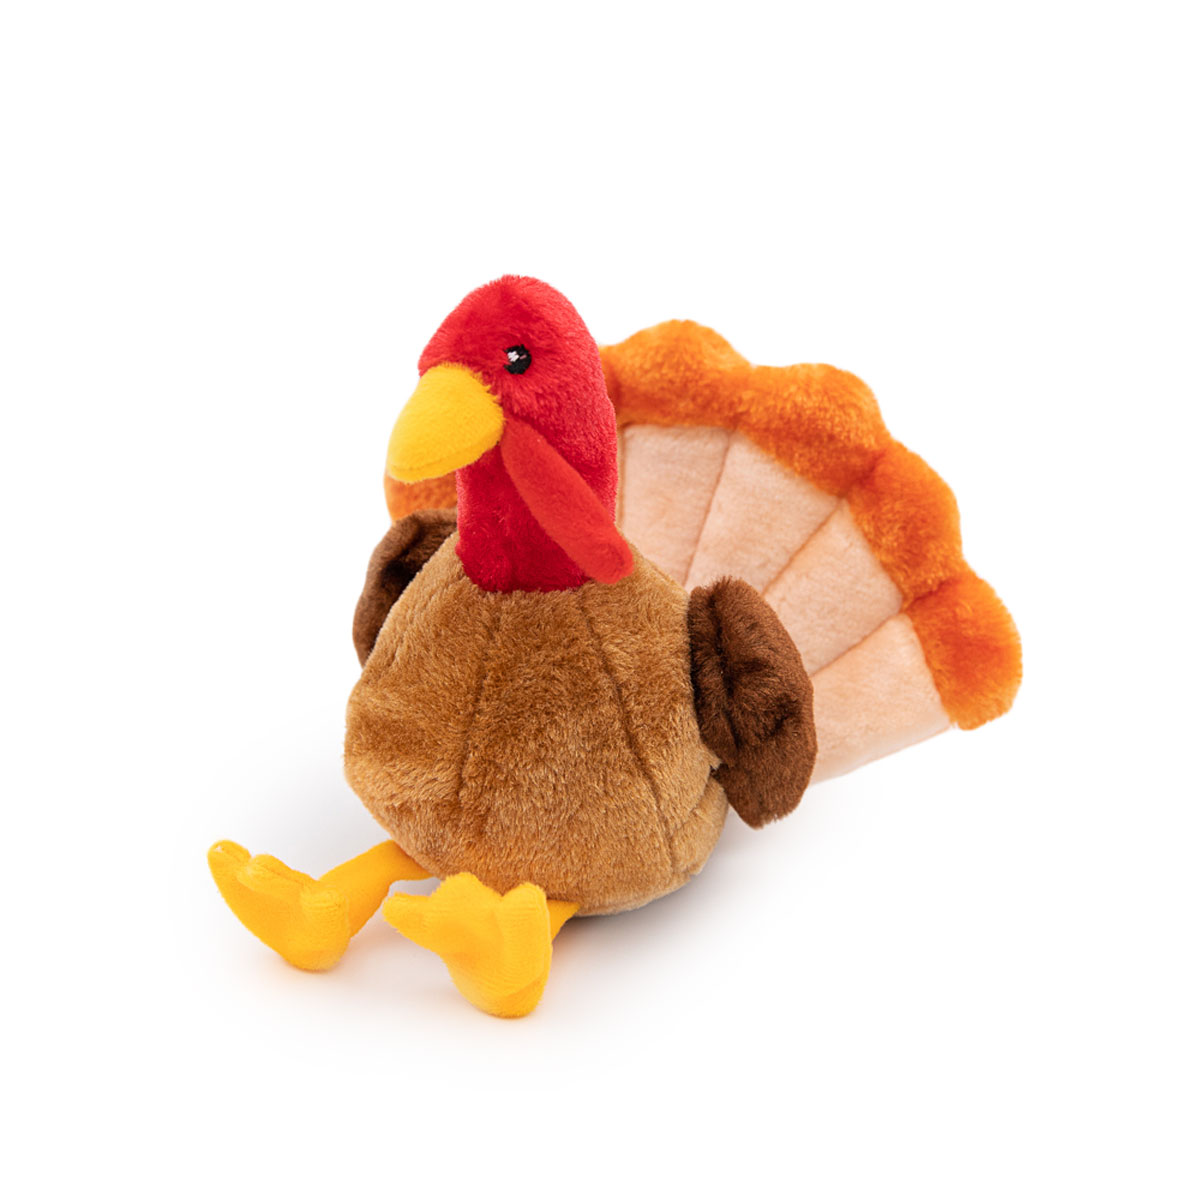 ZippyPaws - NomNomz Plush Squeaker Dog Toy For The Foodie Pup - Croissant